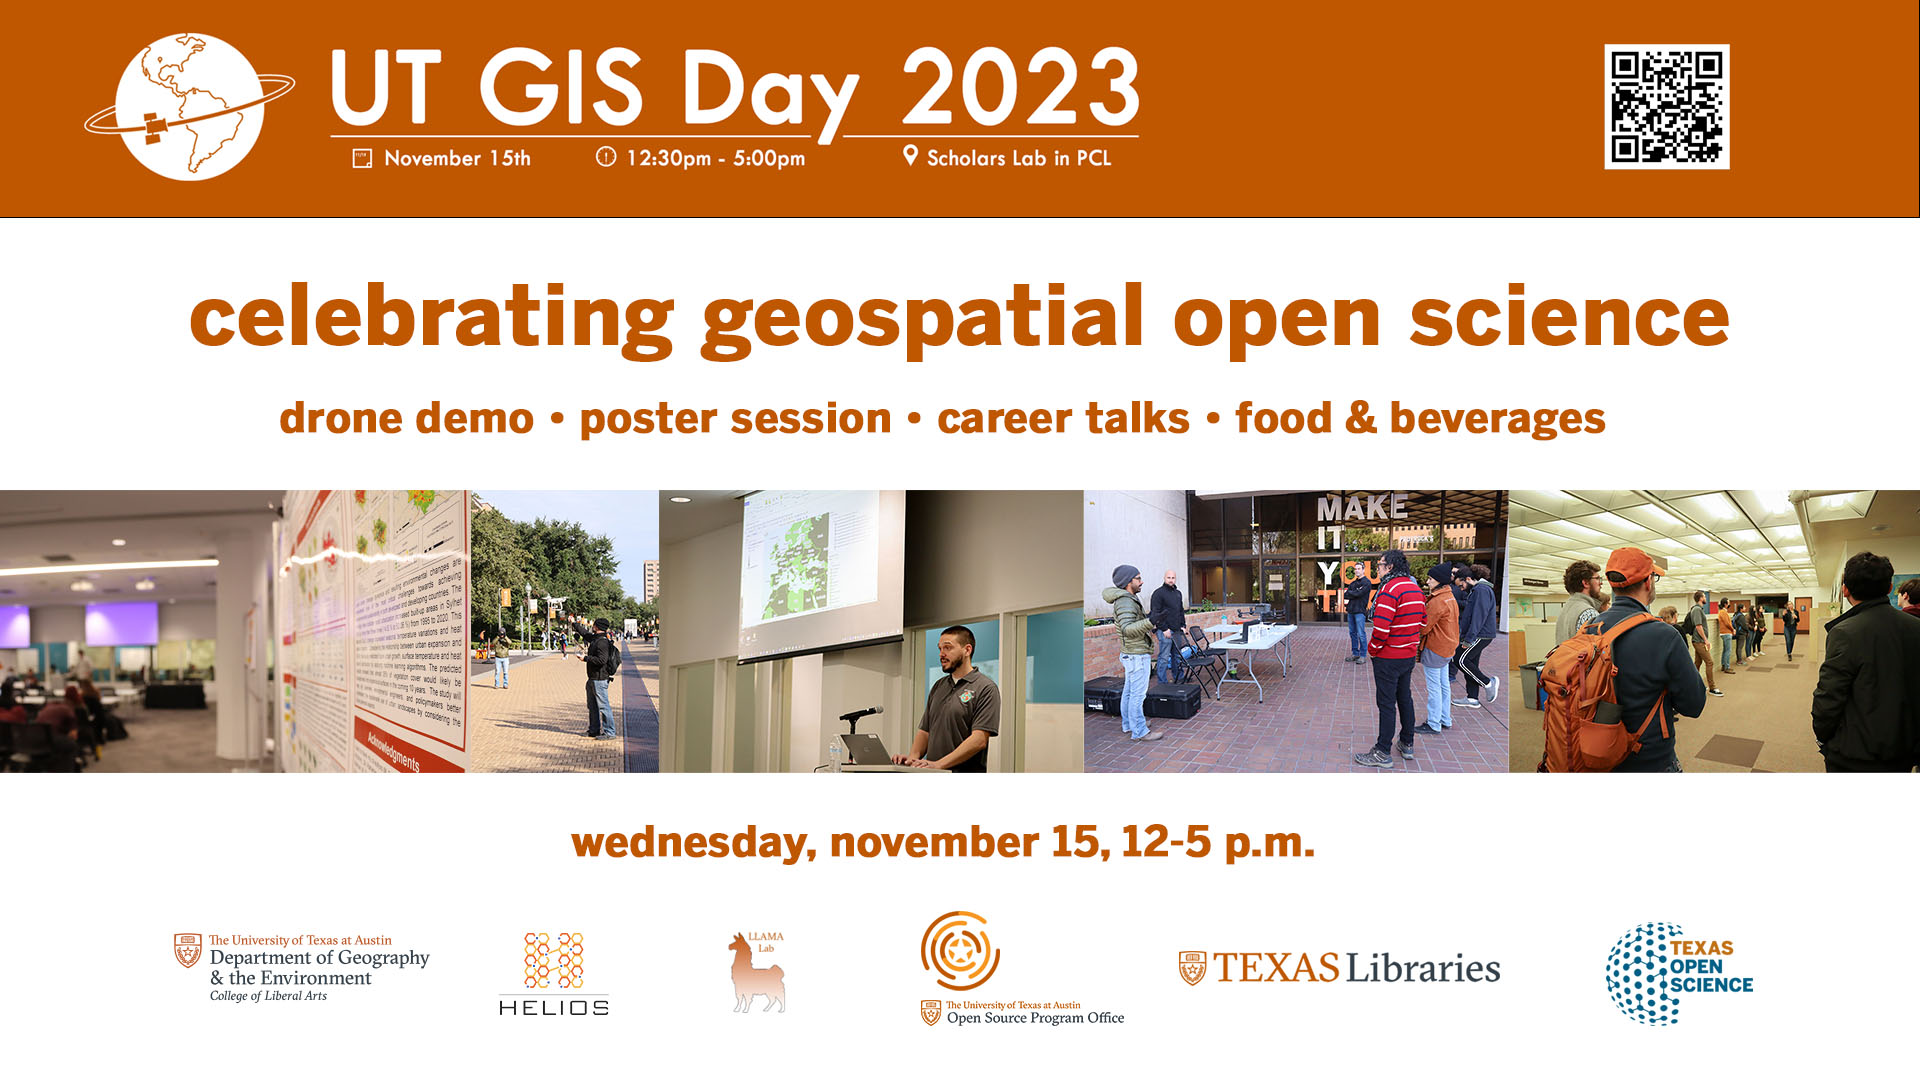 graphic for gis day 2023. white background with orange banner and collage of images from previous gis day celebrations